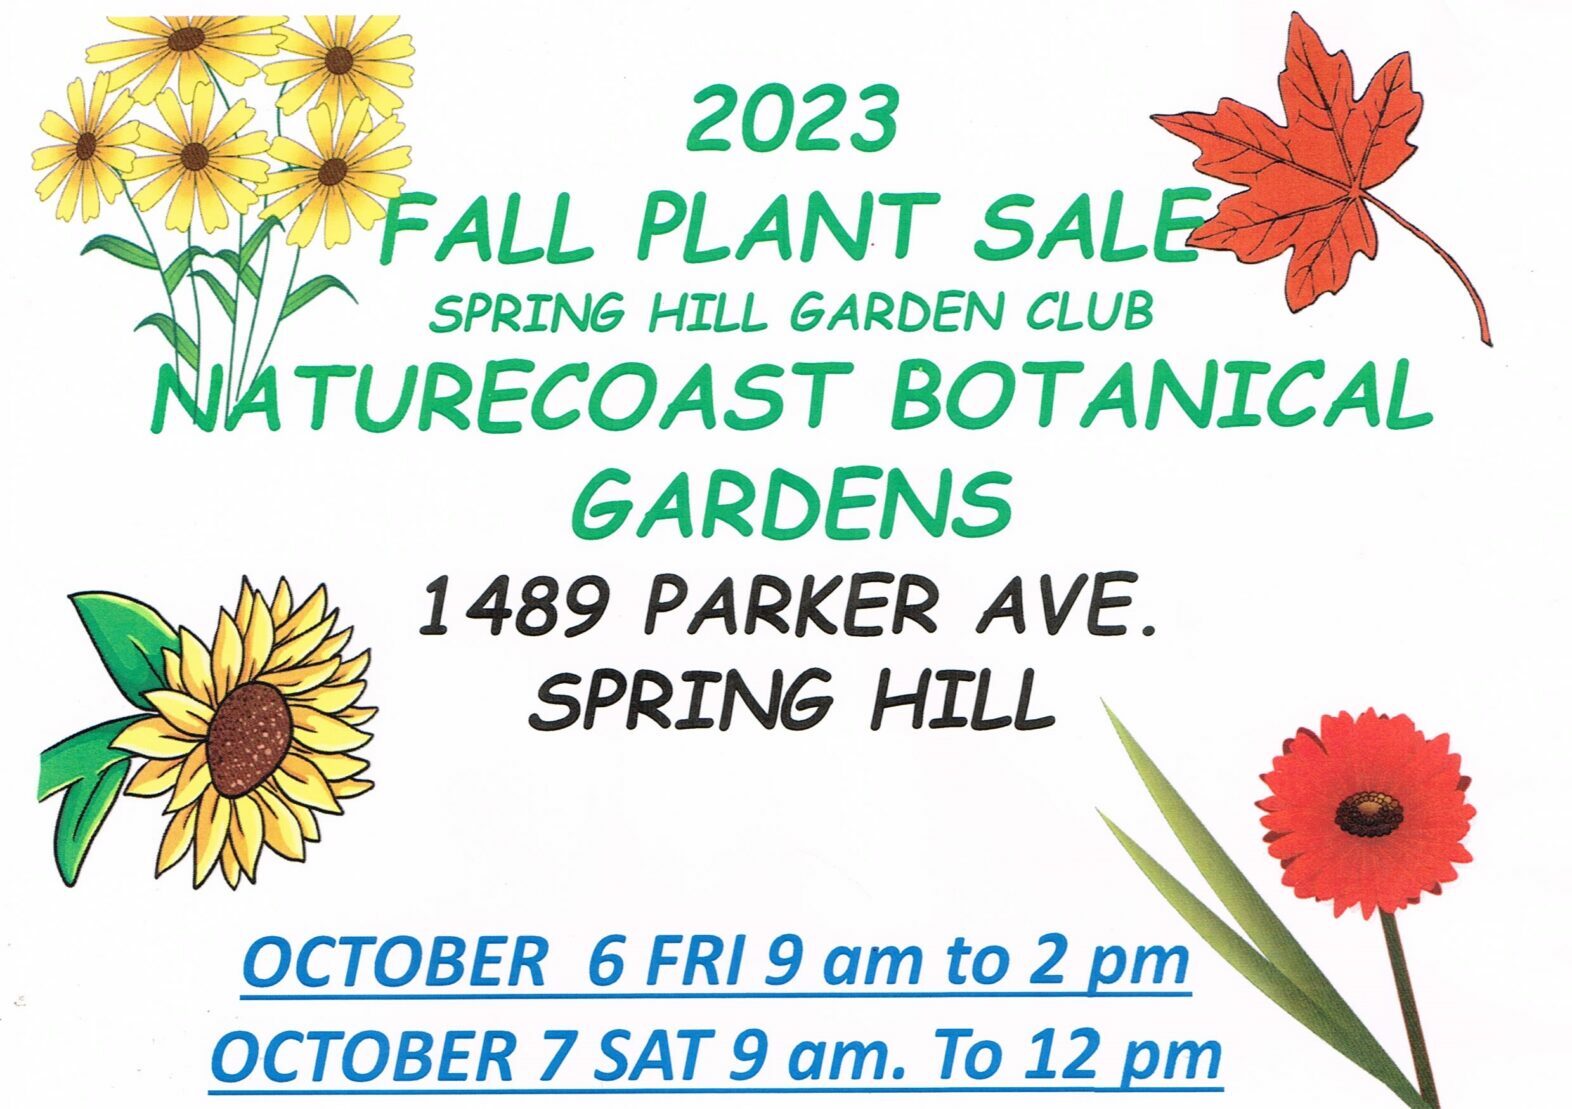 https://naturecoaster.com/wp-content/uploads/2023/08/2023-fall-plant-sale-flyer-scaled-e1693951695444.jpg